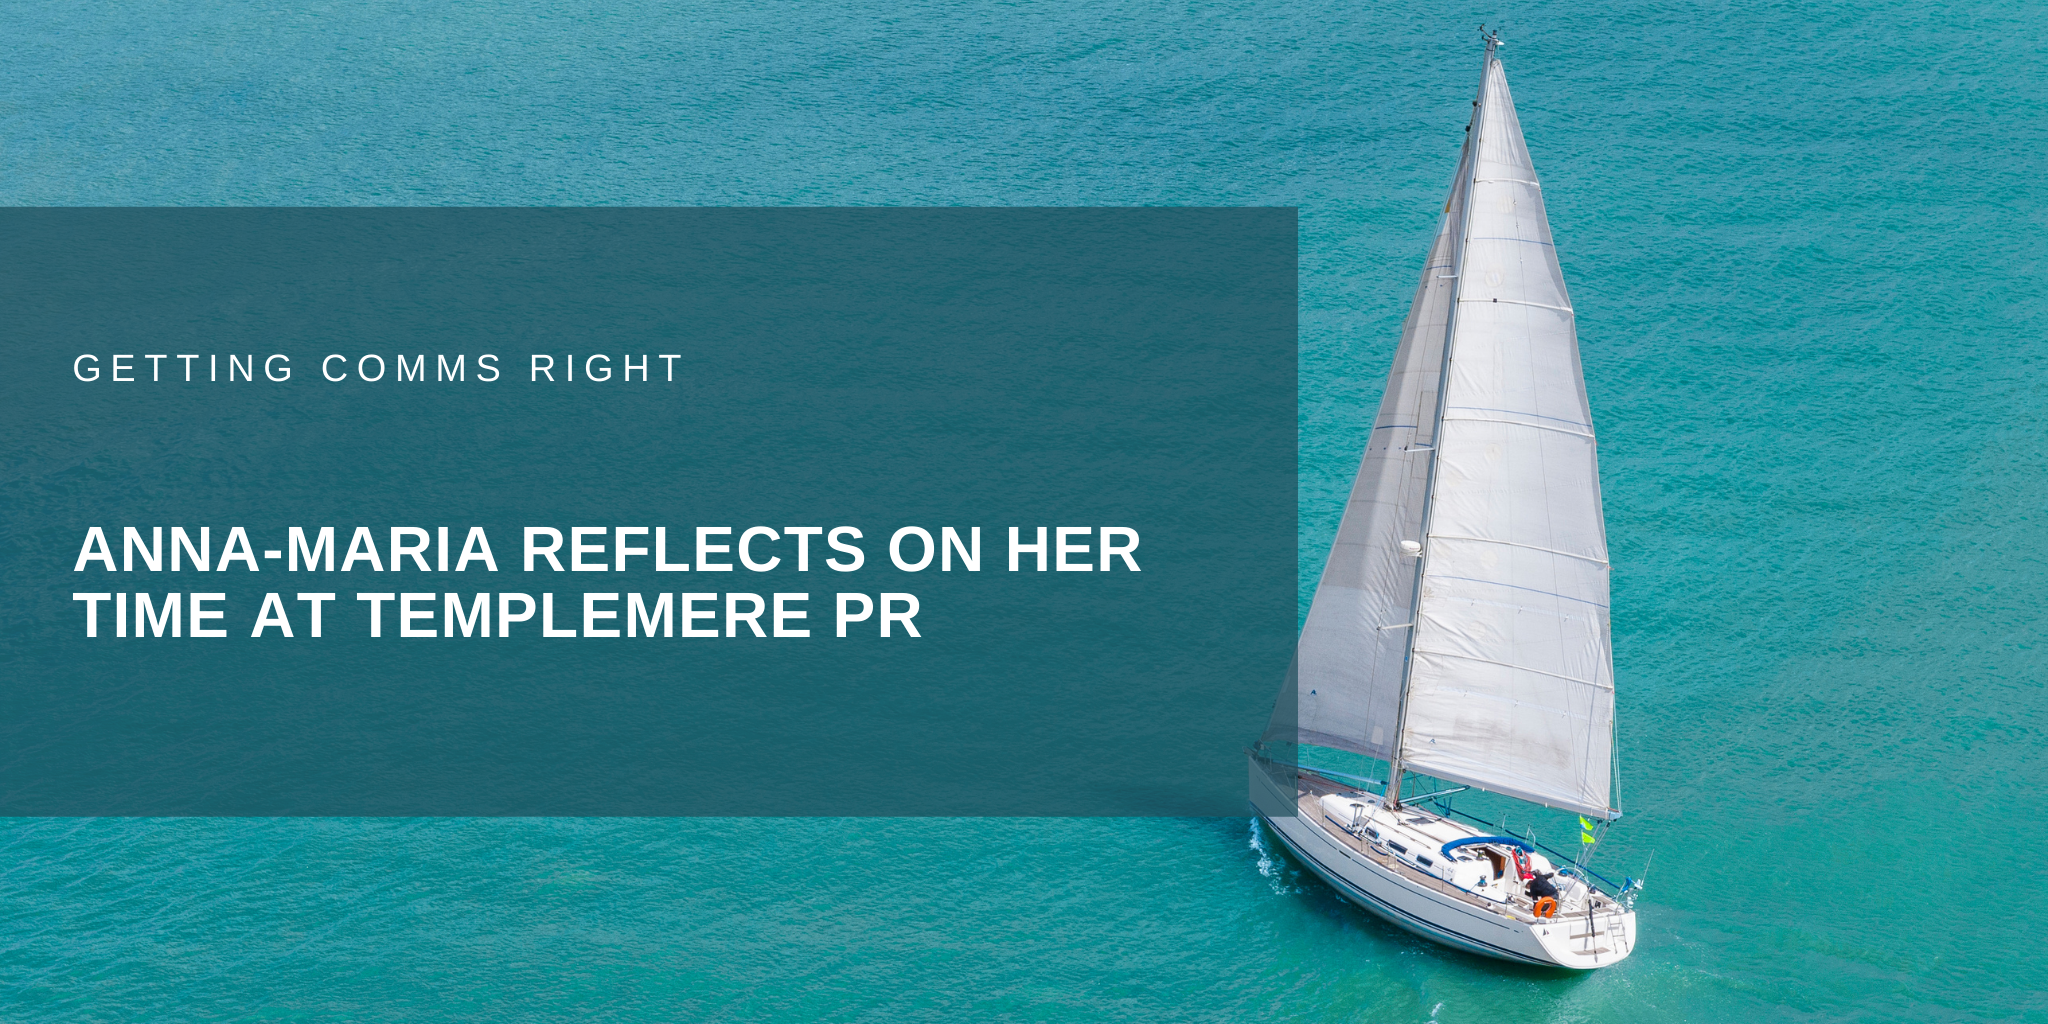 What I’ve Learned From Templemere PR